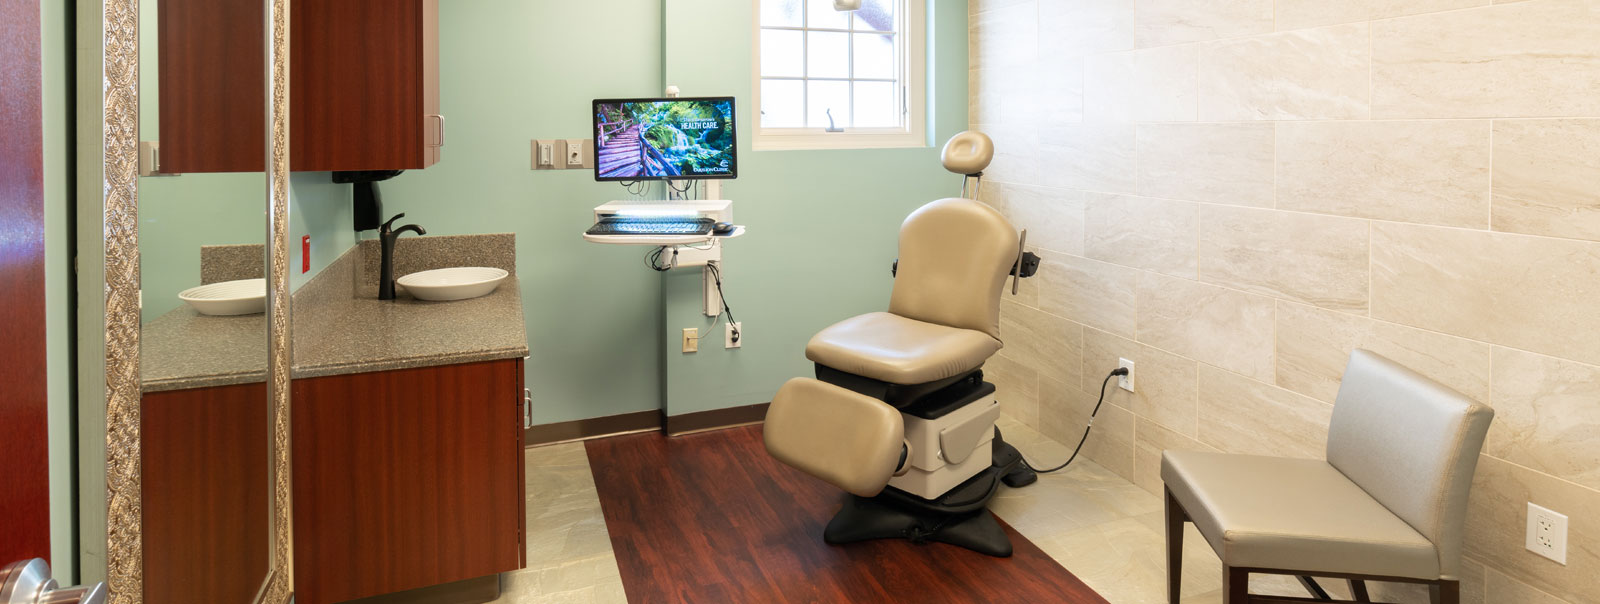 Private room for initial consultation with physician